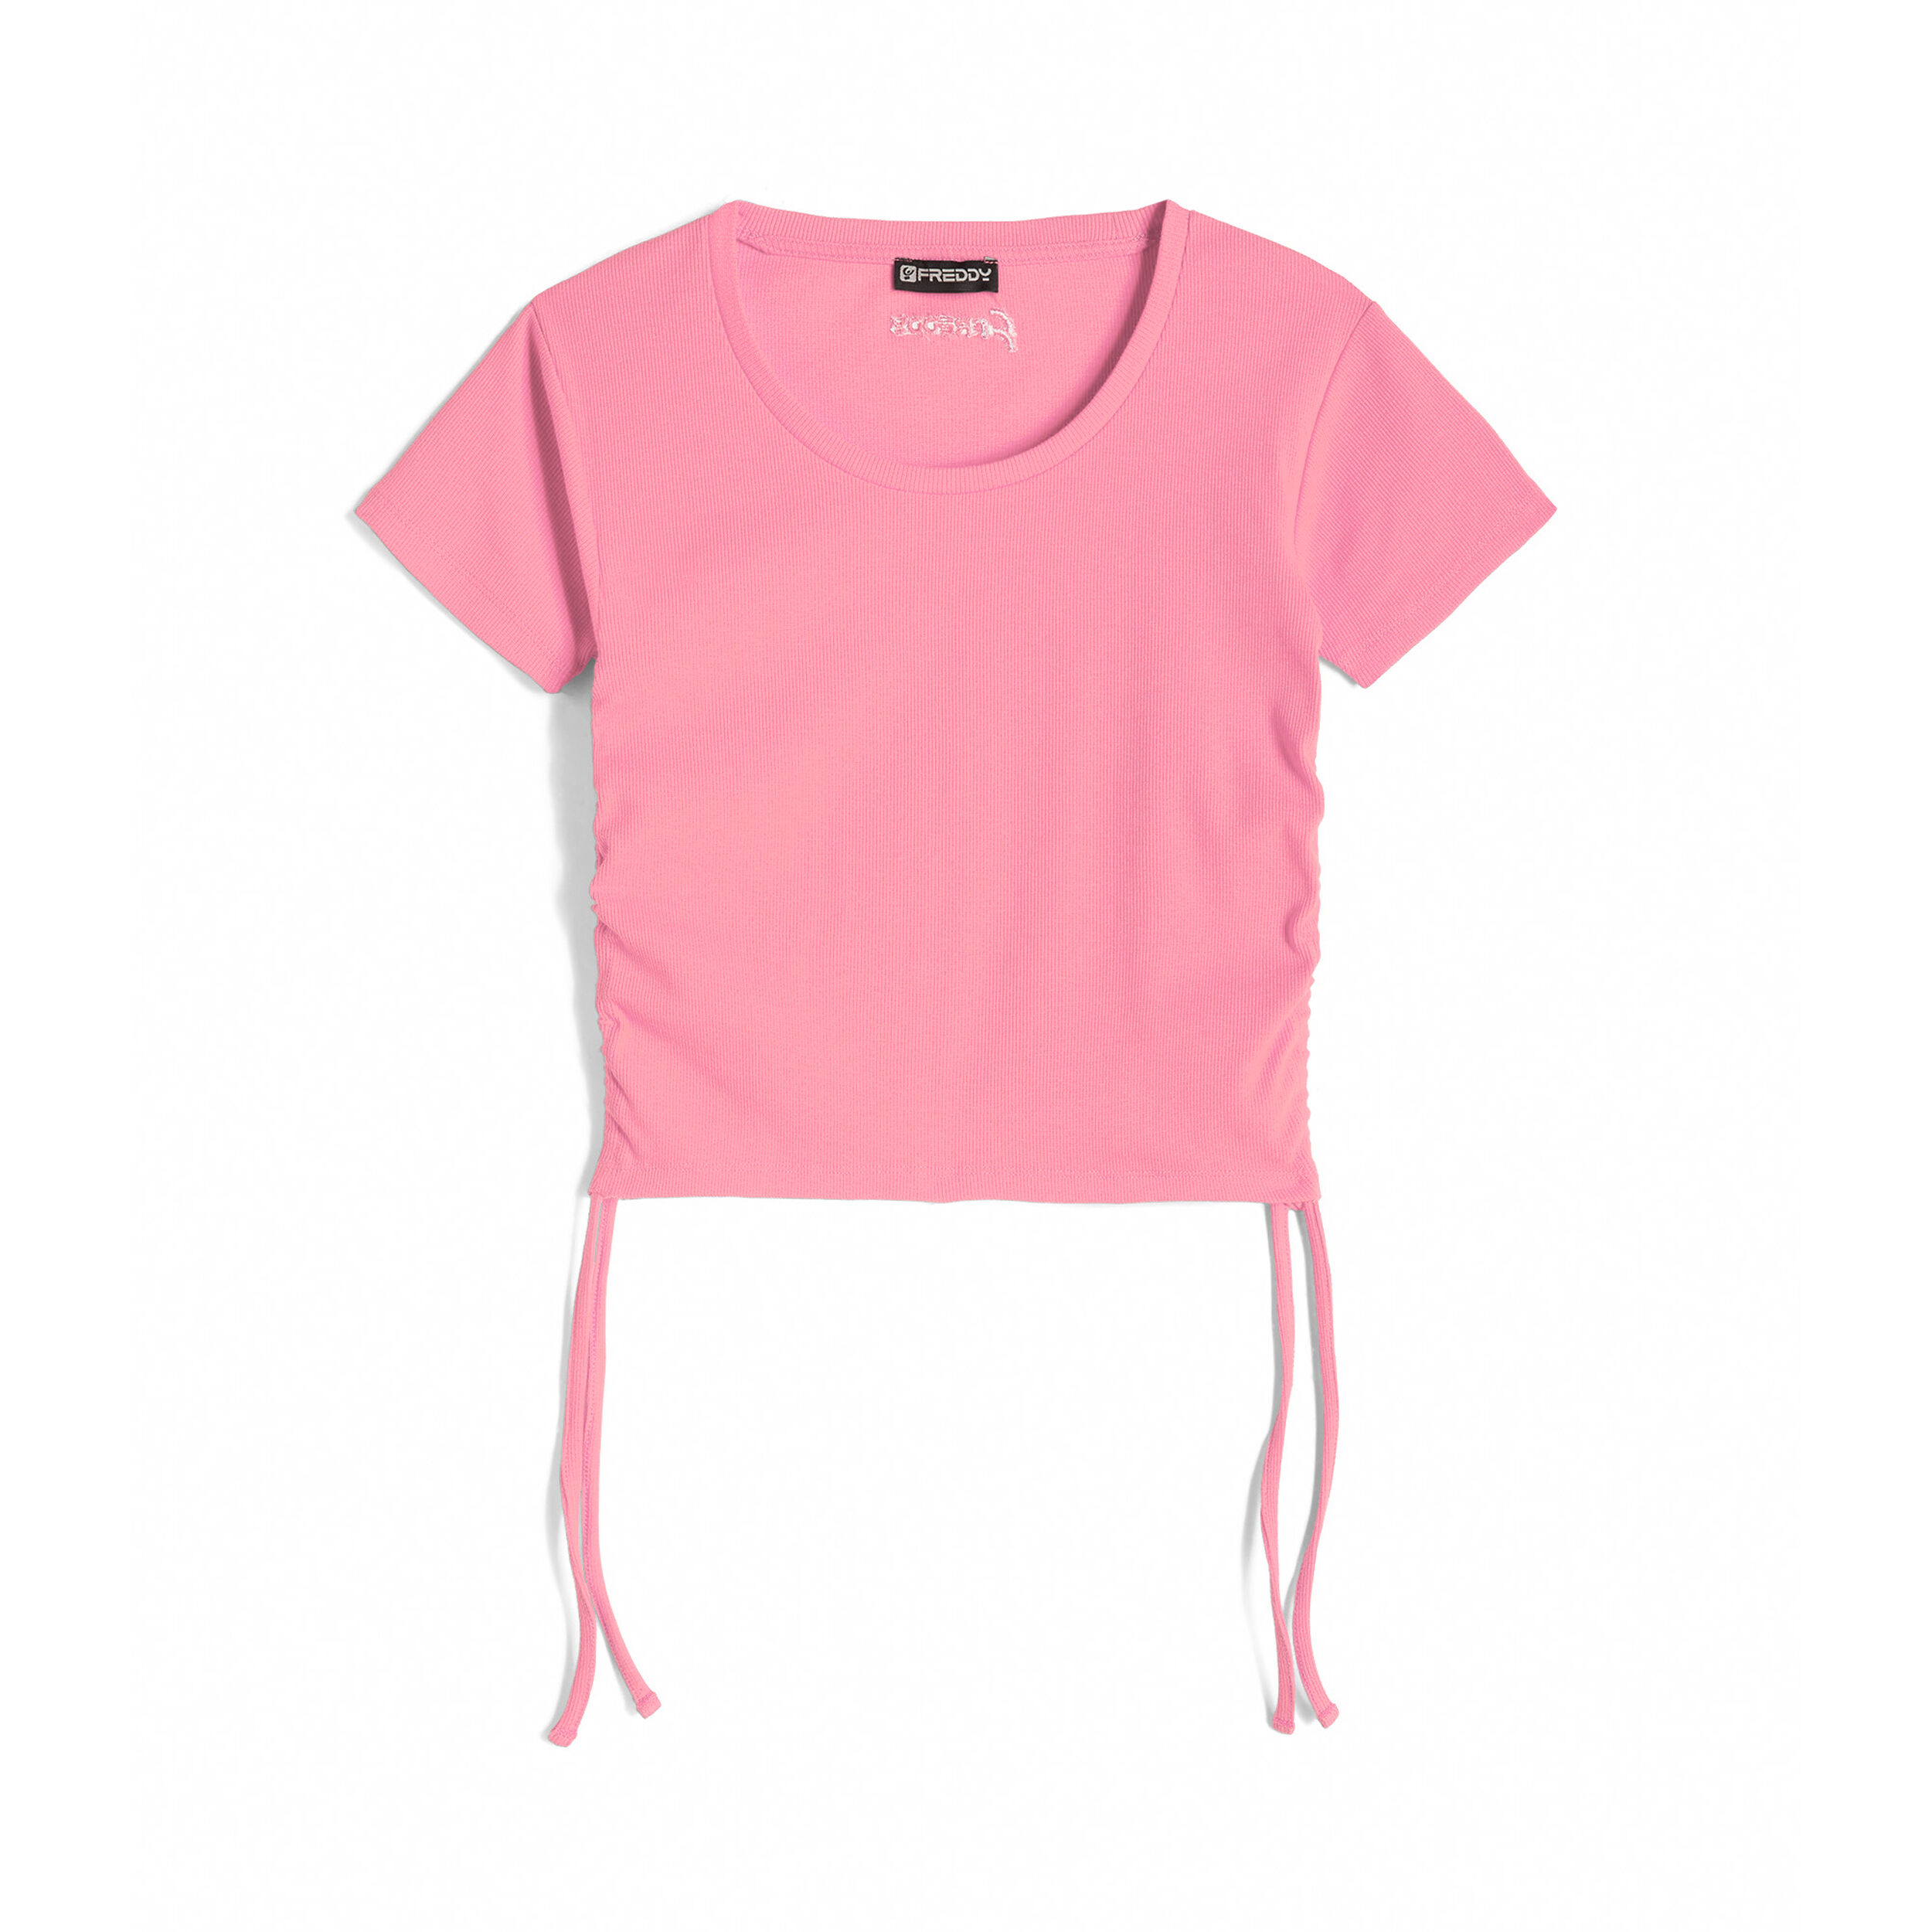 Freddy T-shirt donna slim fit in costina con laccetti sui fianchi Pink Carnation Donna Extra Small